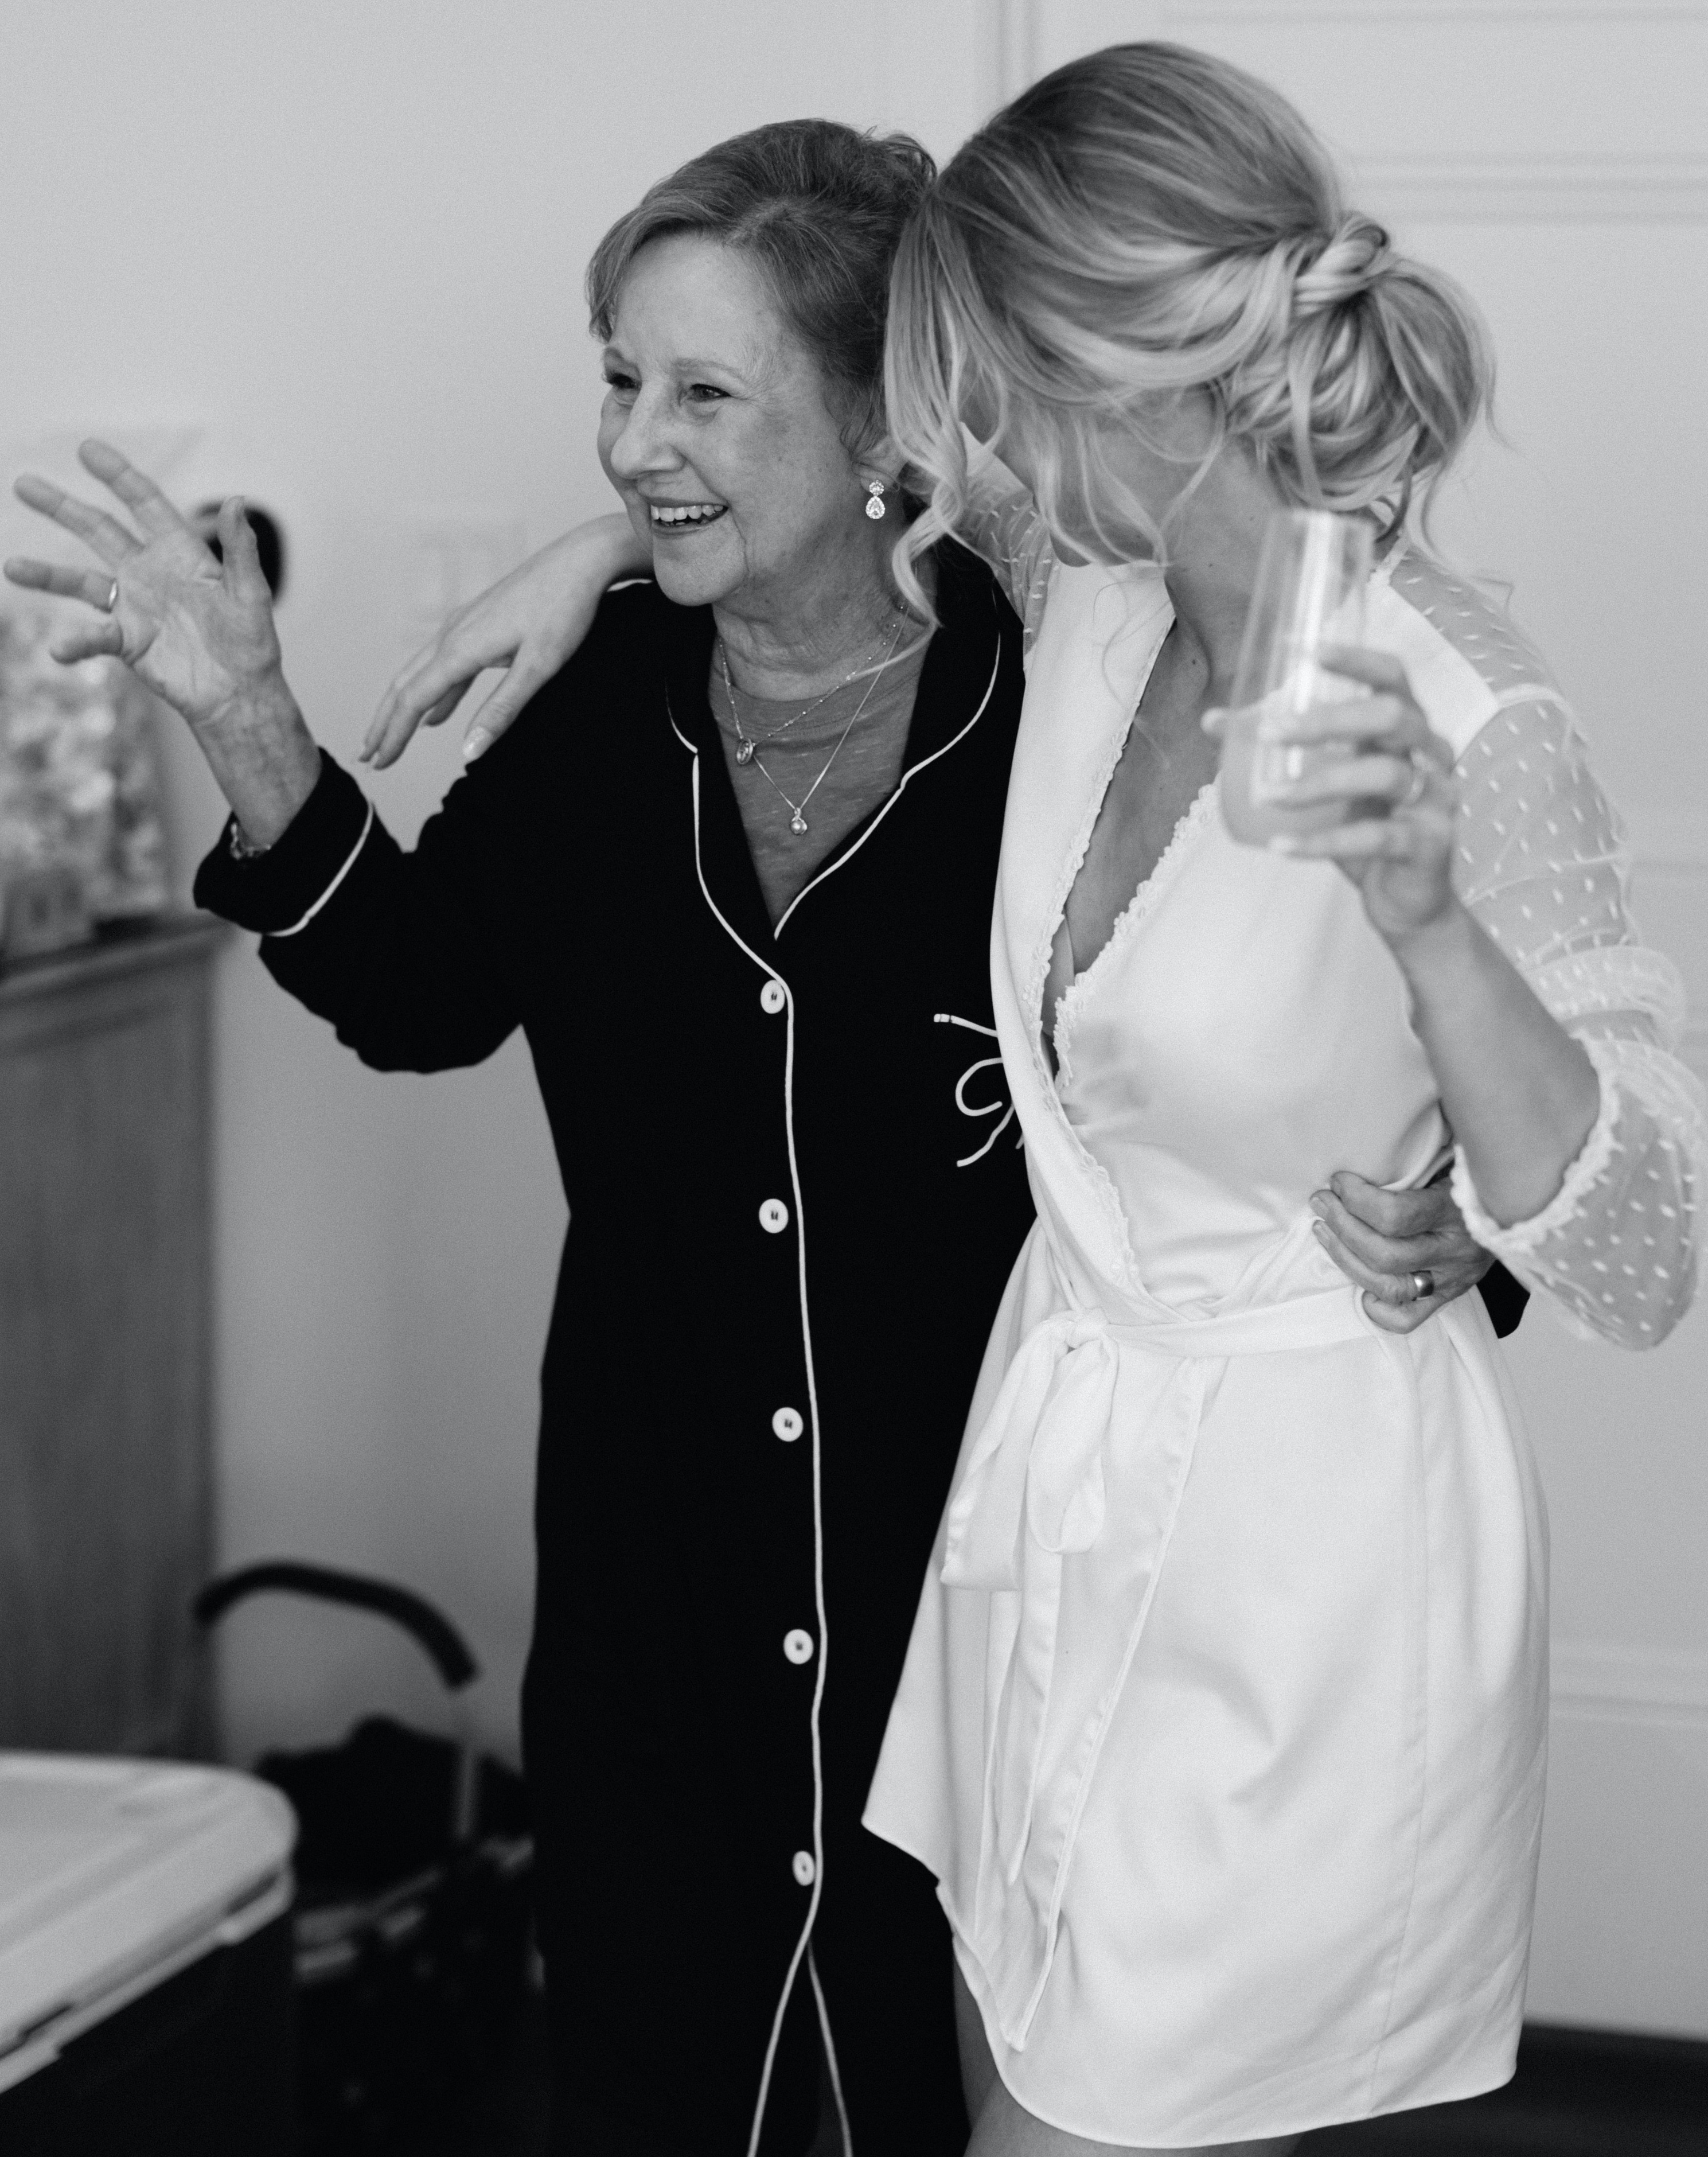 A bride dances with her grandma while they are in their robes getting ready for her wedding day in Brenham, TX.